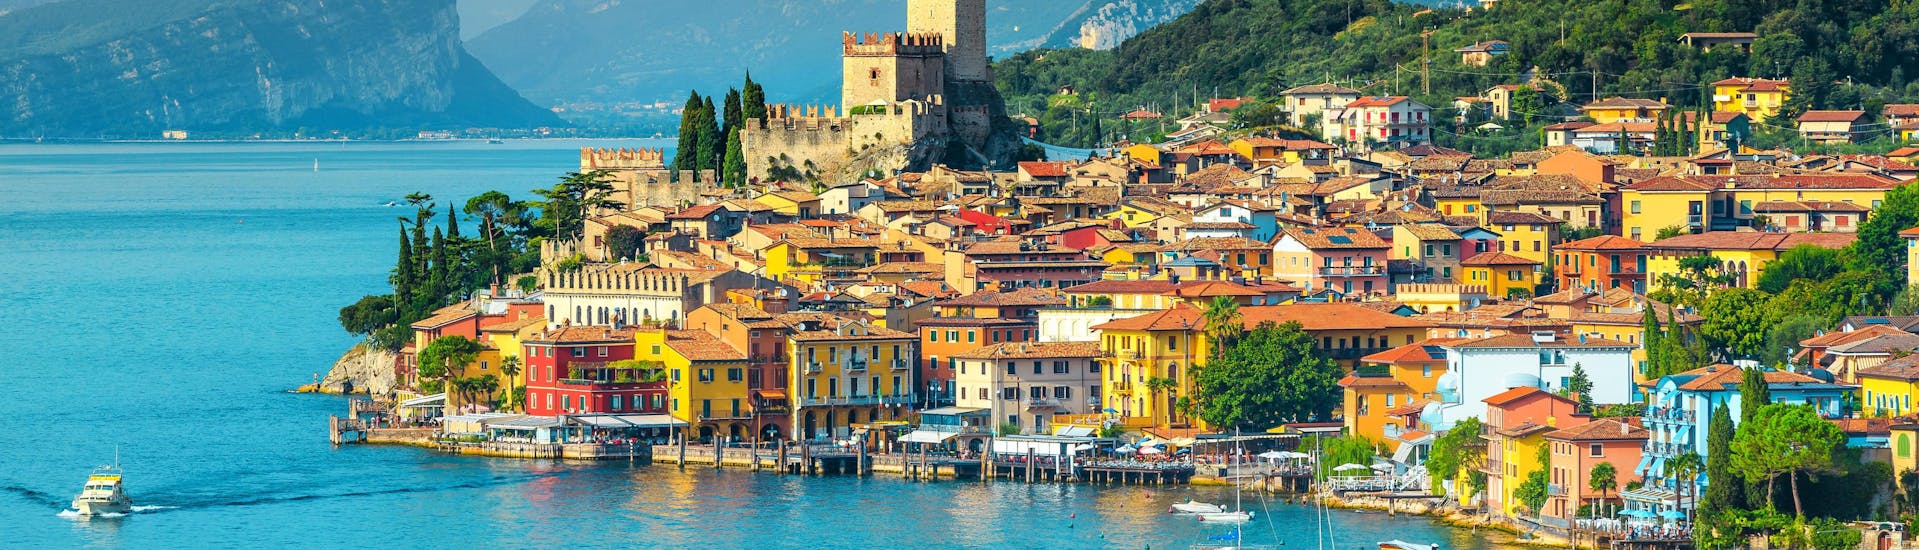 The town of Malcesine at Lake Garda, Italy where you can book online boat trips.